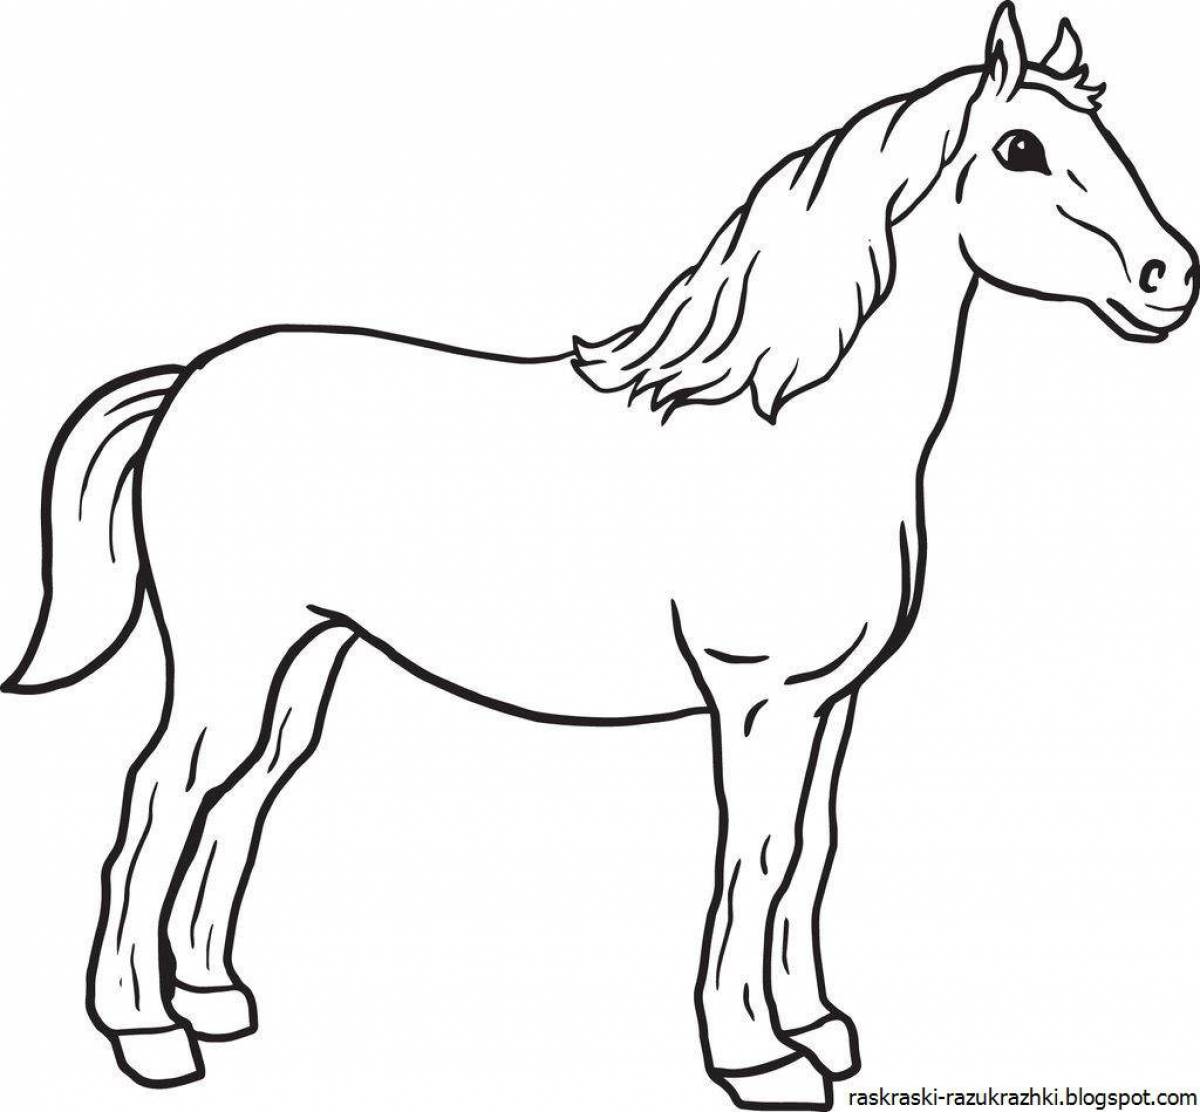 Bright horse coloring book for 3-4 year olds